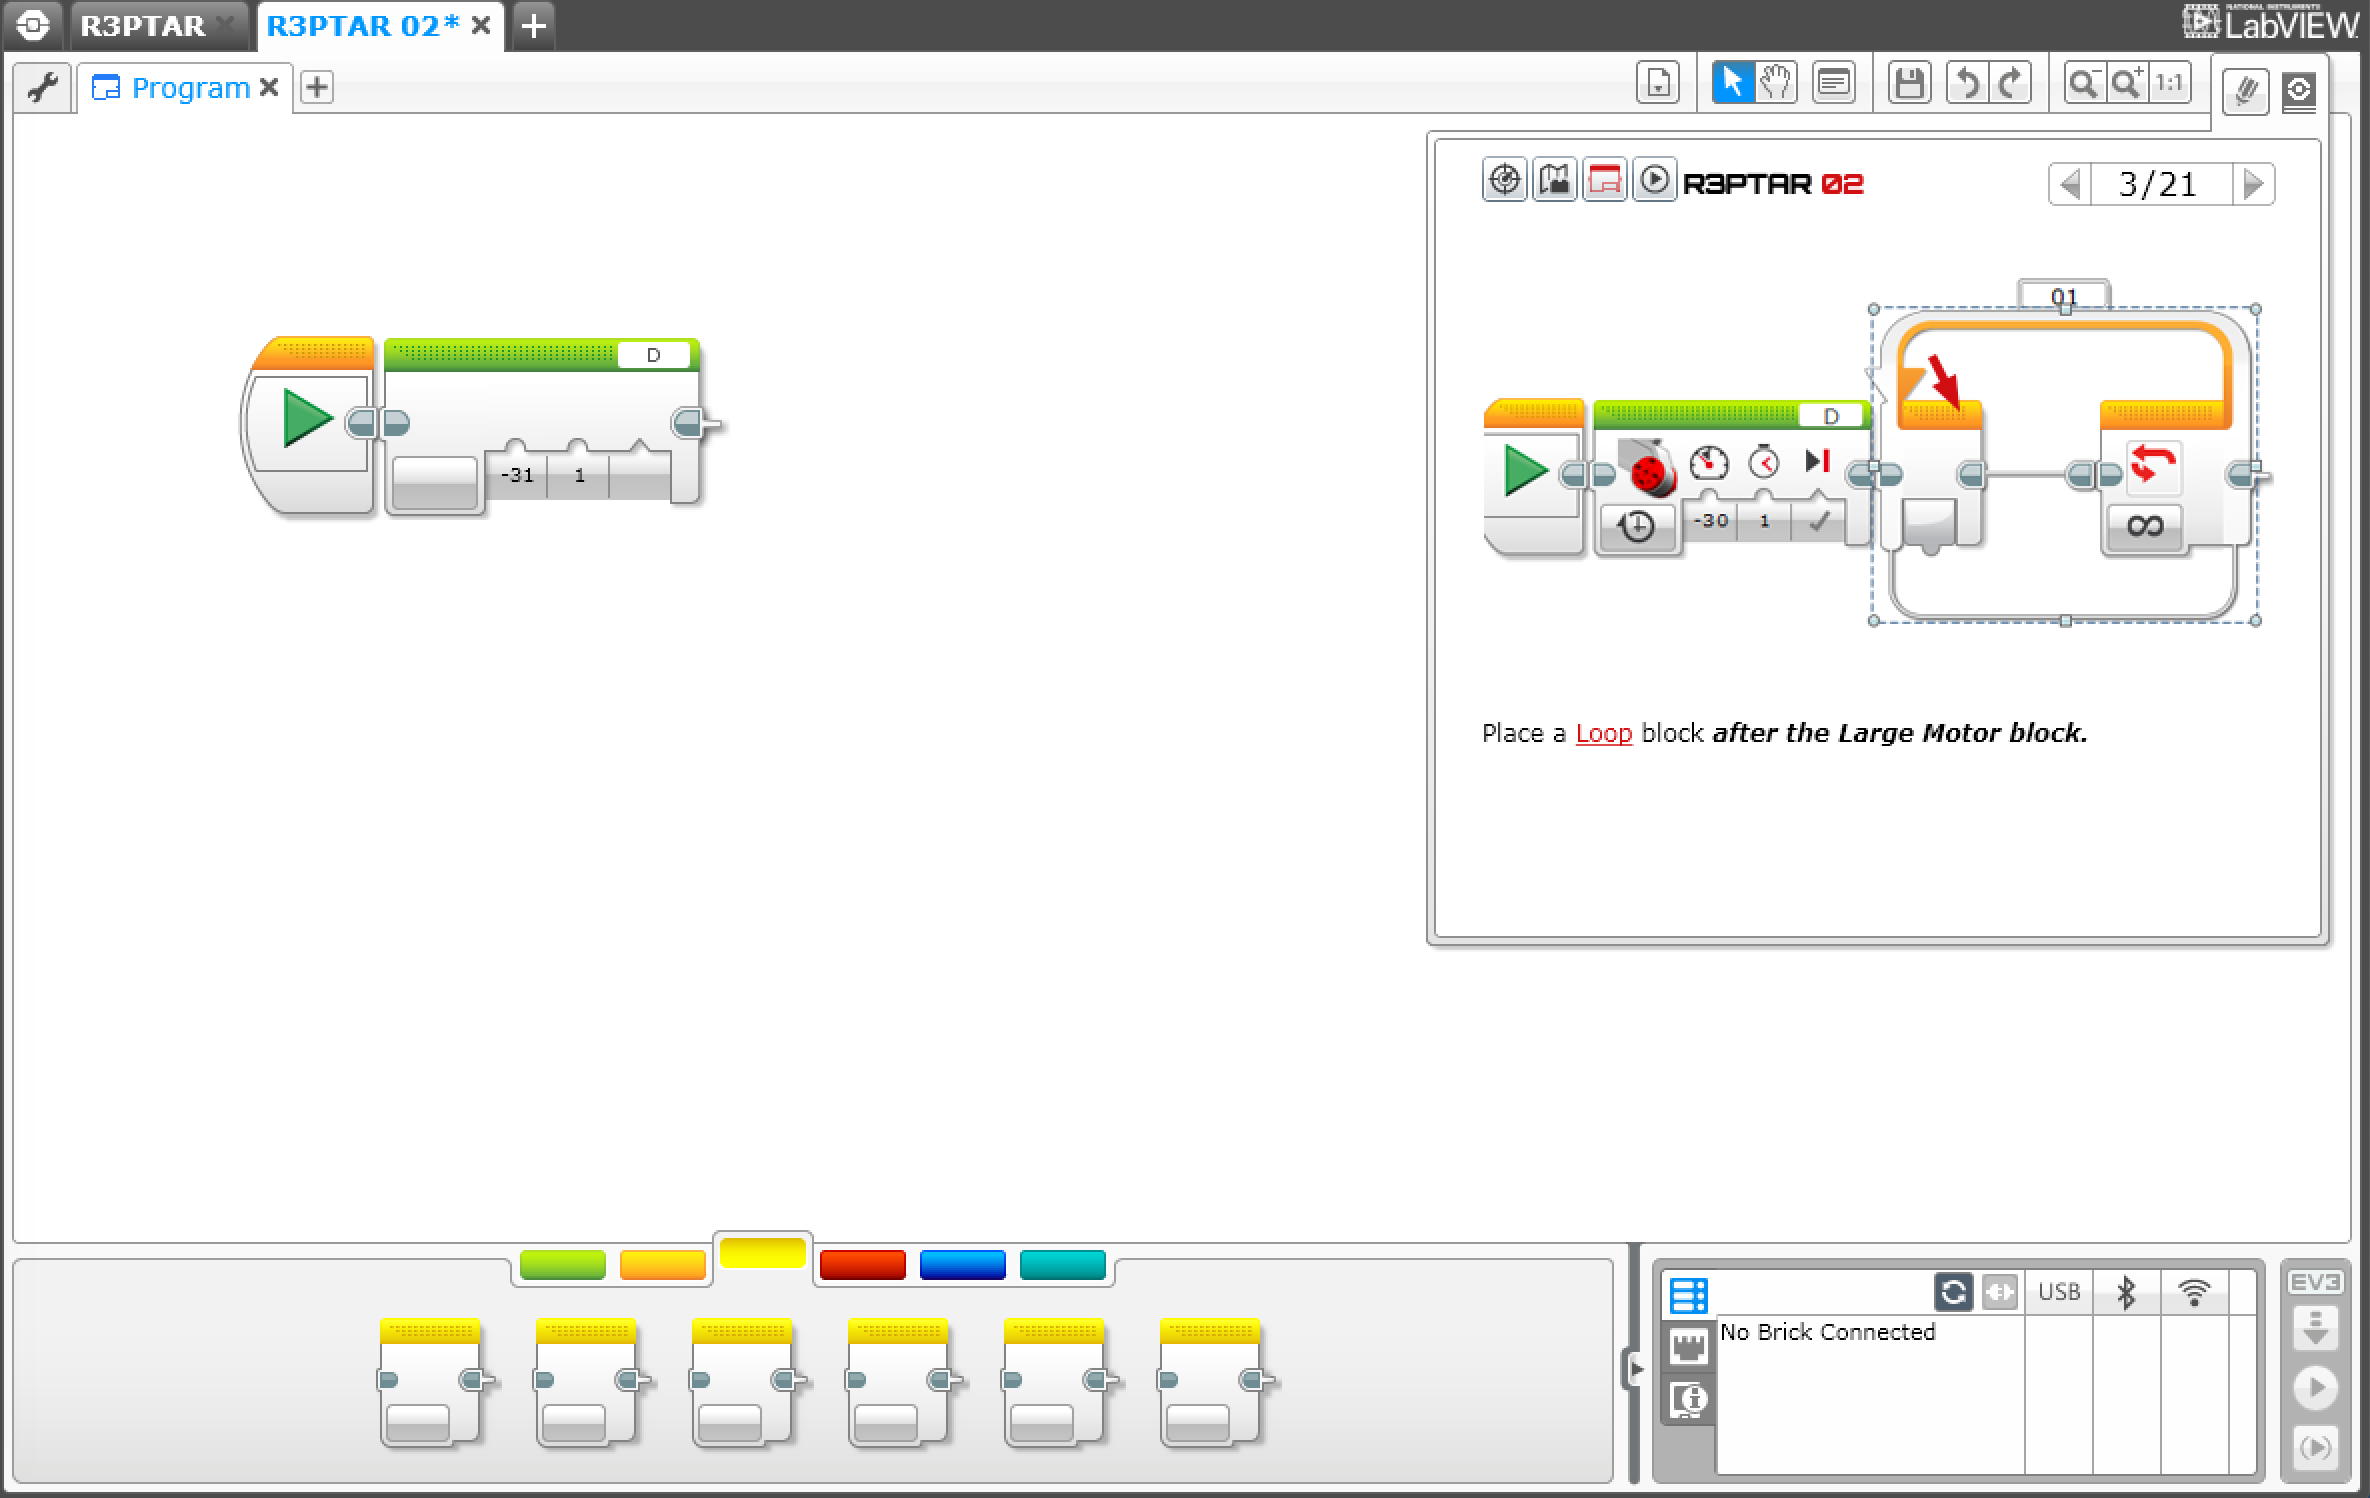 lego mindstorms nxt download for mac